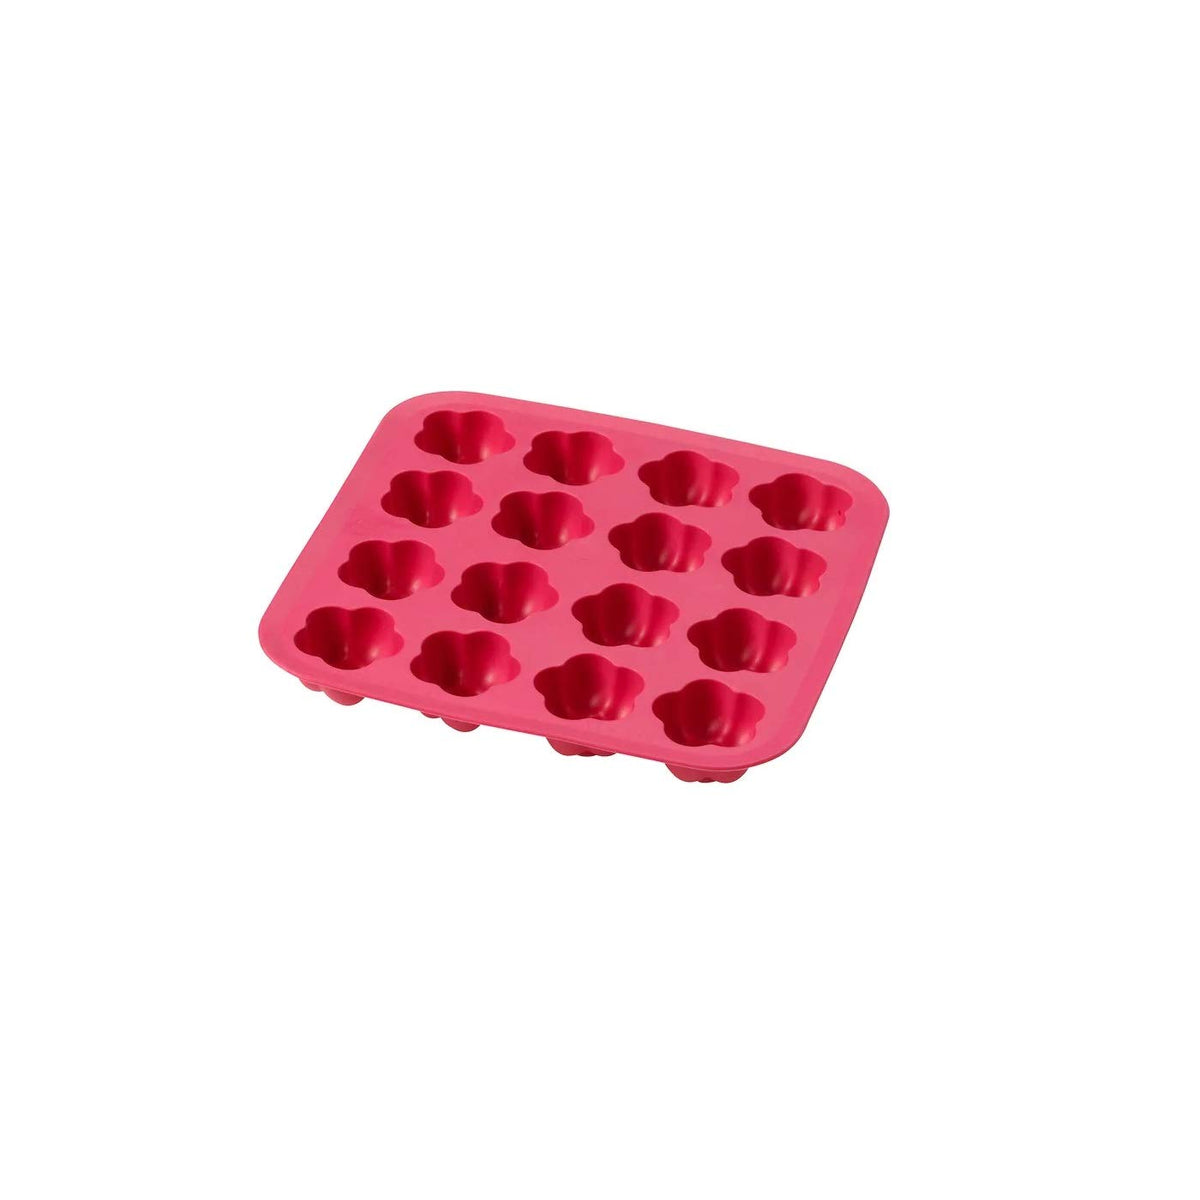 Ikea Plastis Synthetic Rubber Ice Cube Tray, Blue, 1